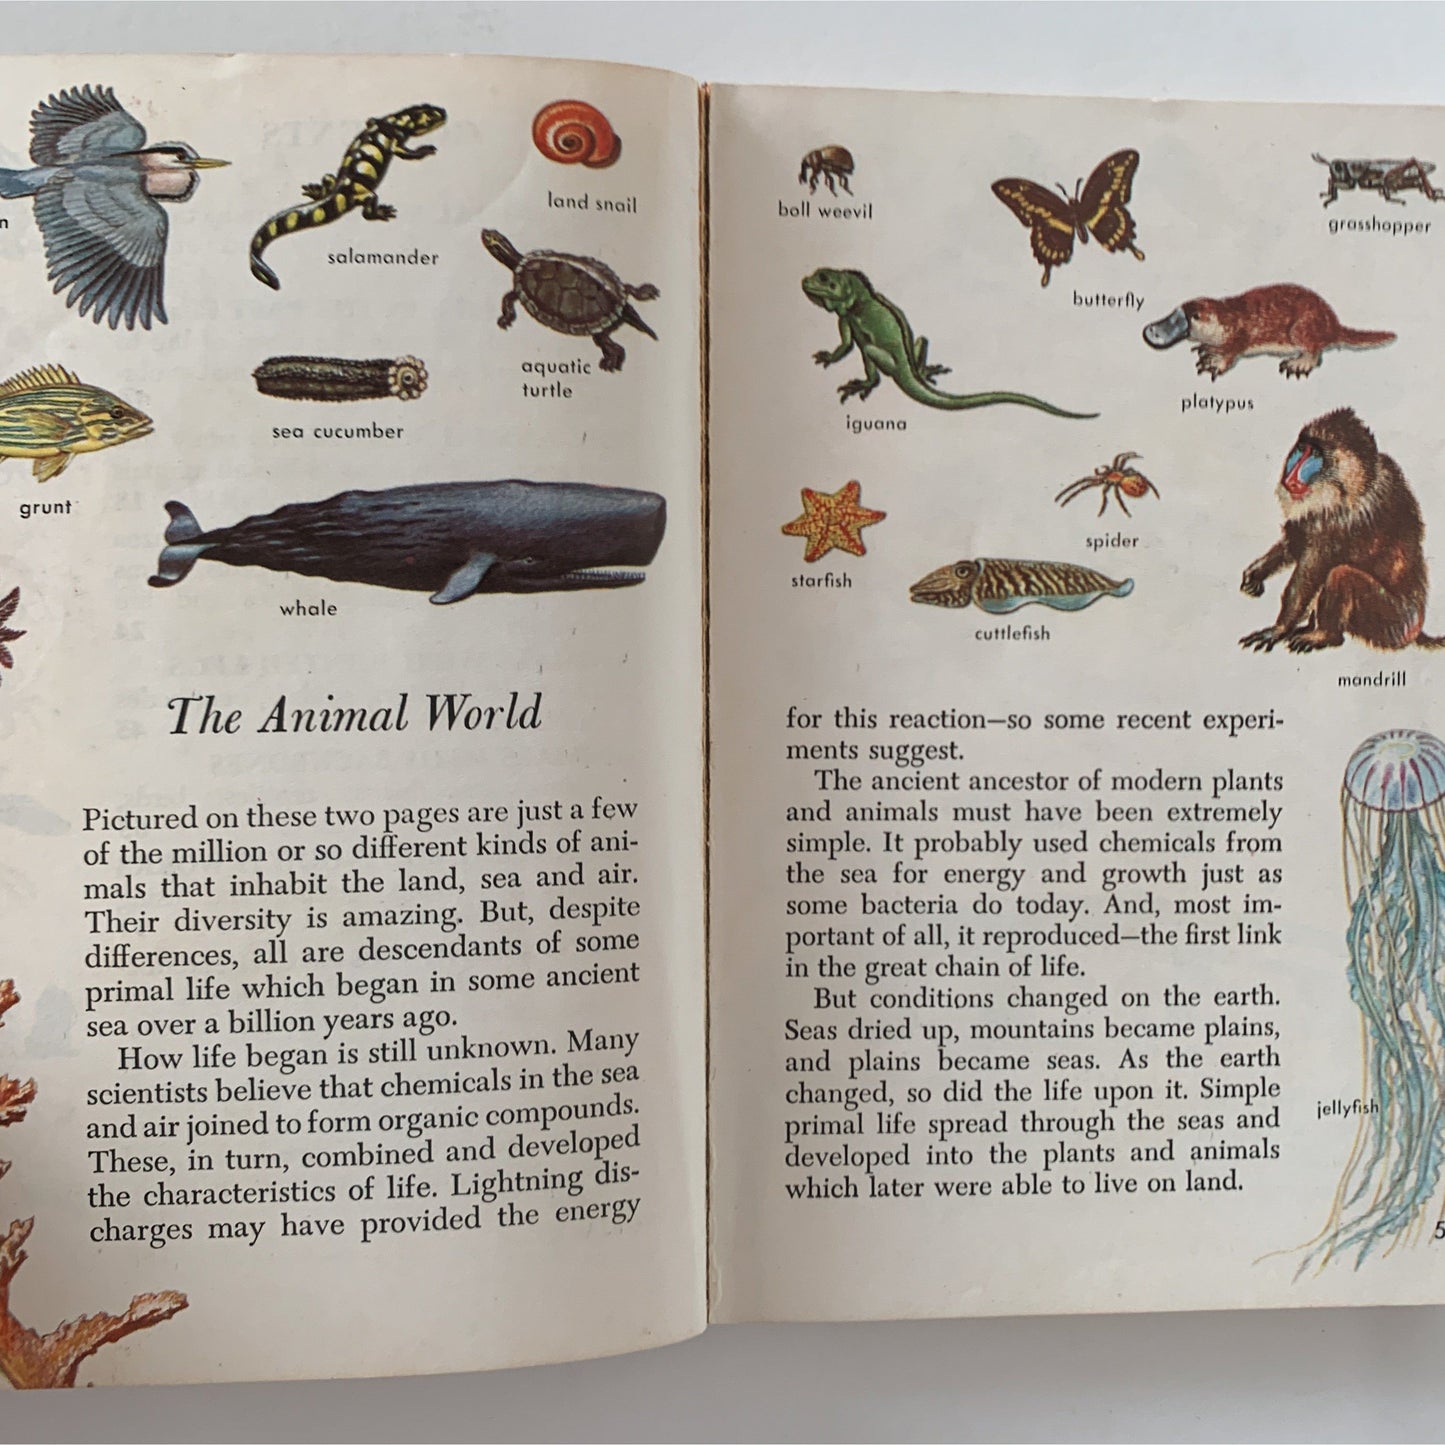 Zoology: An Introduction to the Animal Kingdom, A Golden Science Guide 1958